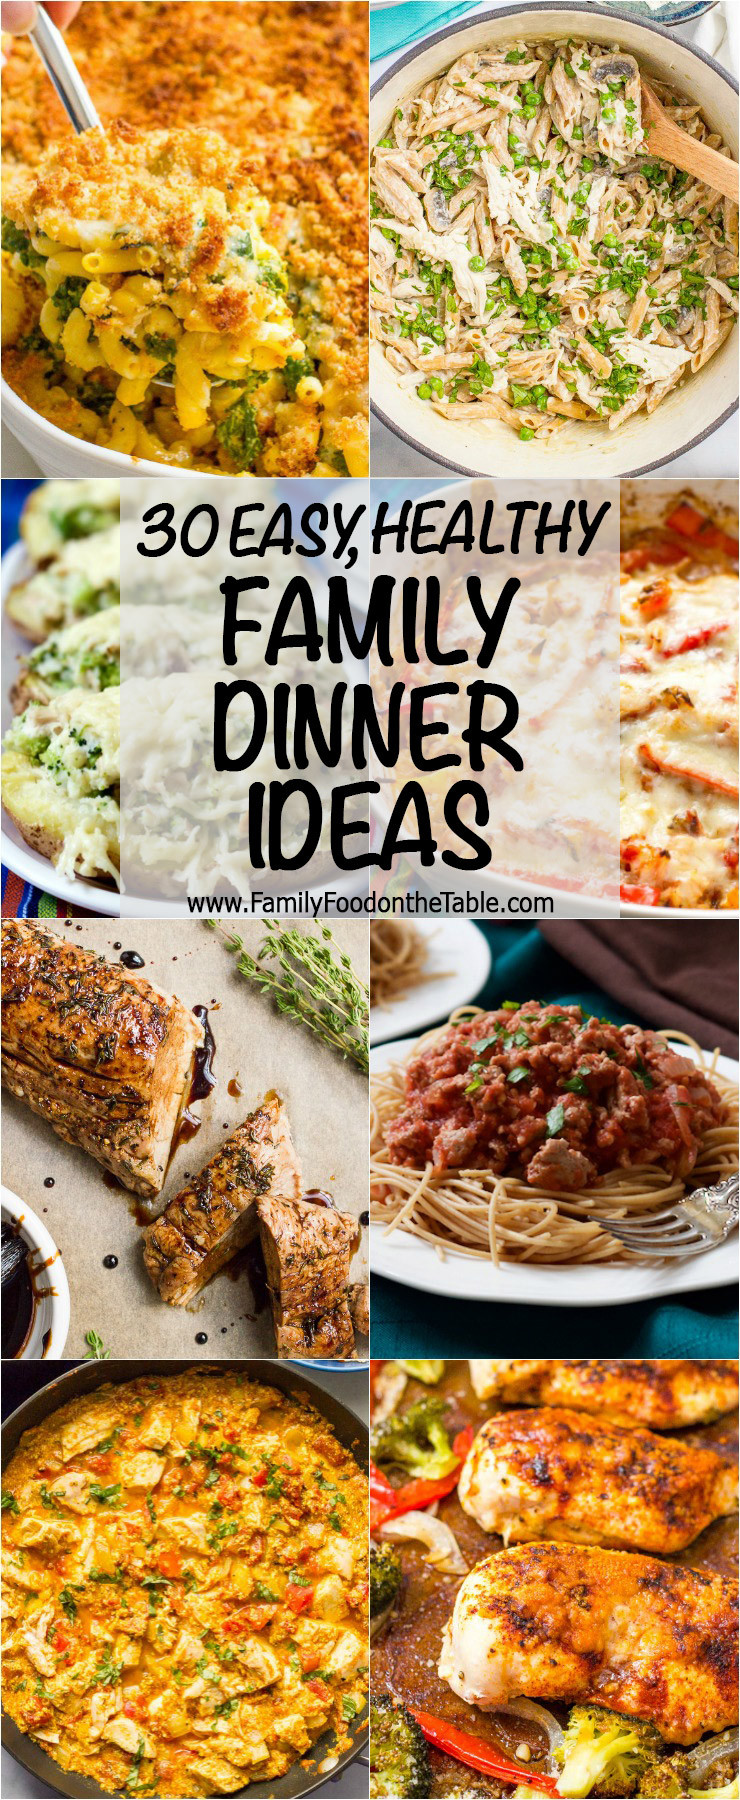 Easy Healthy Kids Dinners
 30 easy healthy family dinner ideas Family Food on the Table